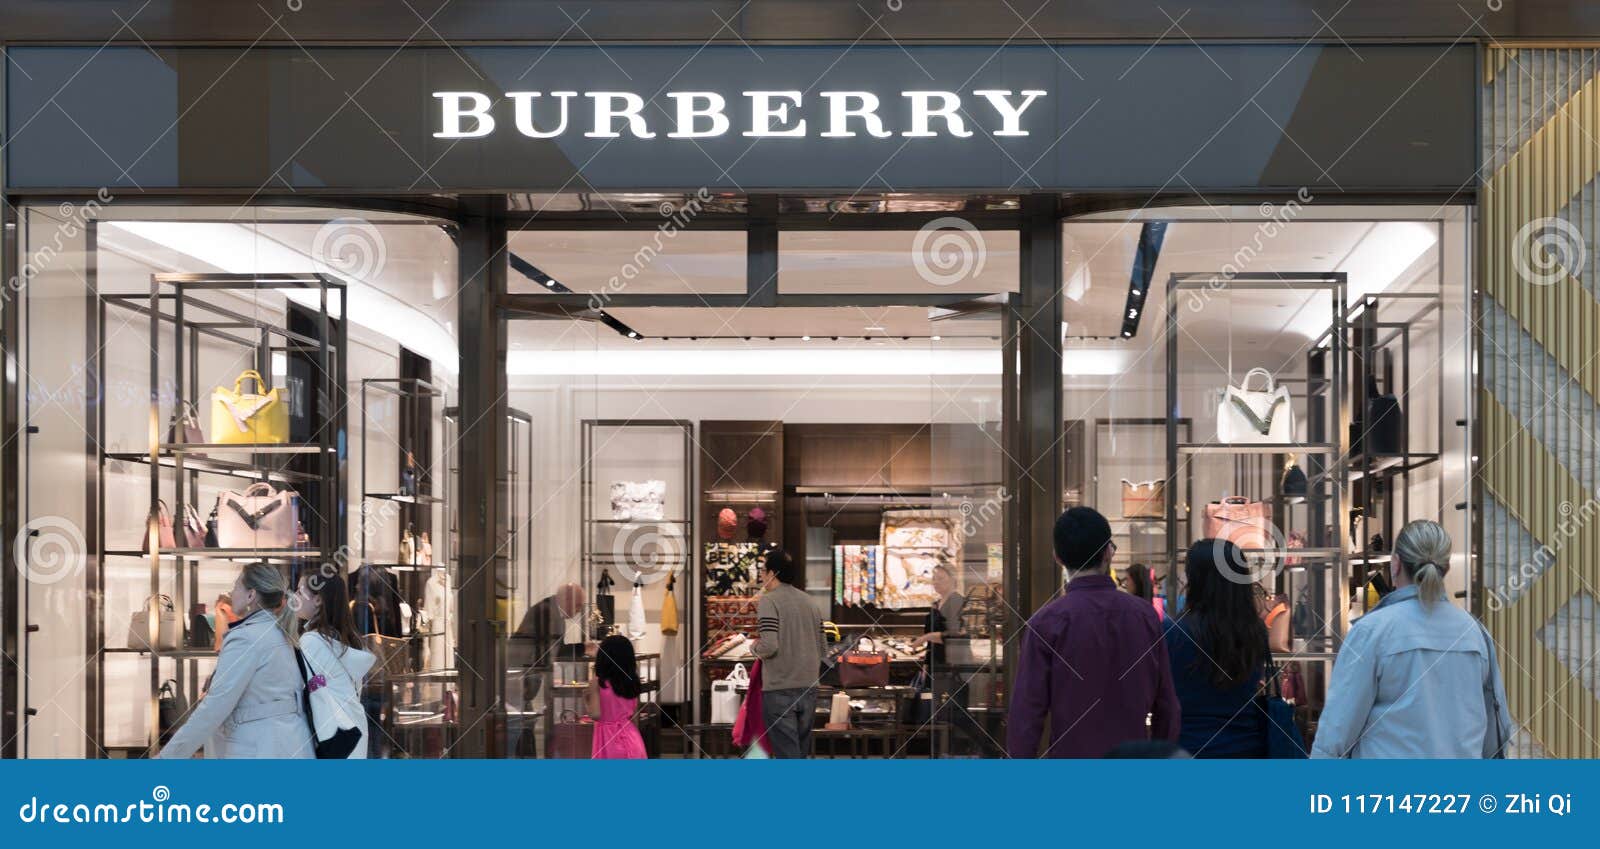 burberry stanford mall